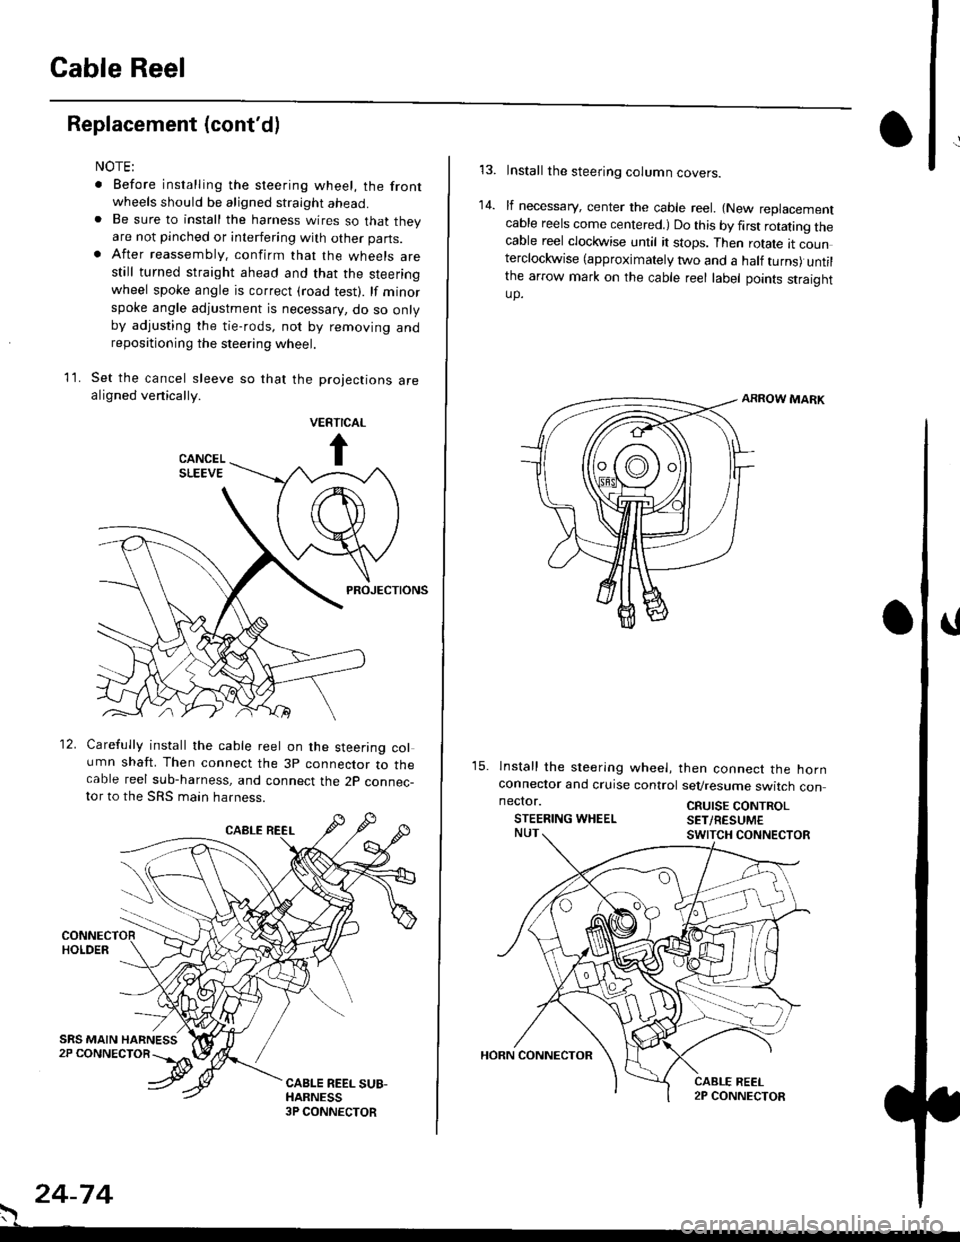 HONDA CIVIC 1997 6.G Repair Manual Cable Reel
Replacement (contd)
11.
NOTE:
. Before installing the steering wheel, the front
wheels should be aligned straight ahead.. Be sure to install the harness wires so that theyare not pinched o